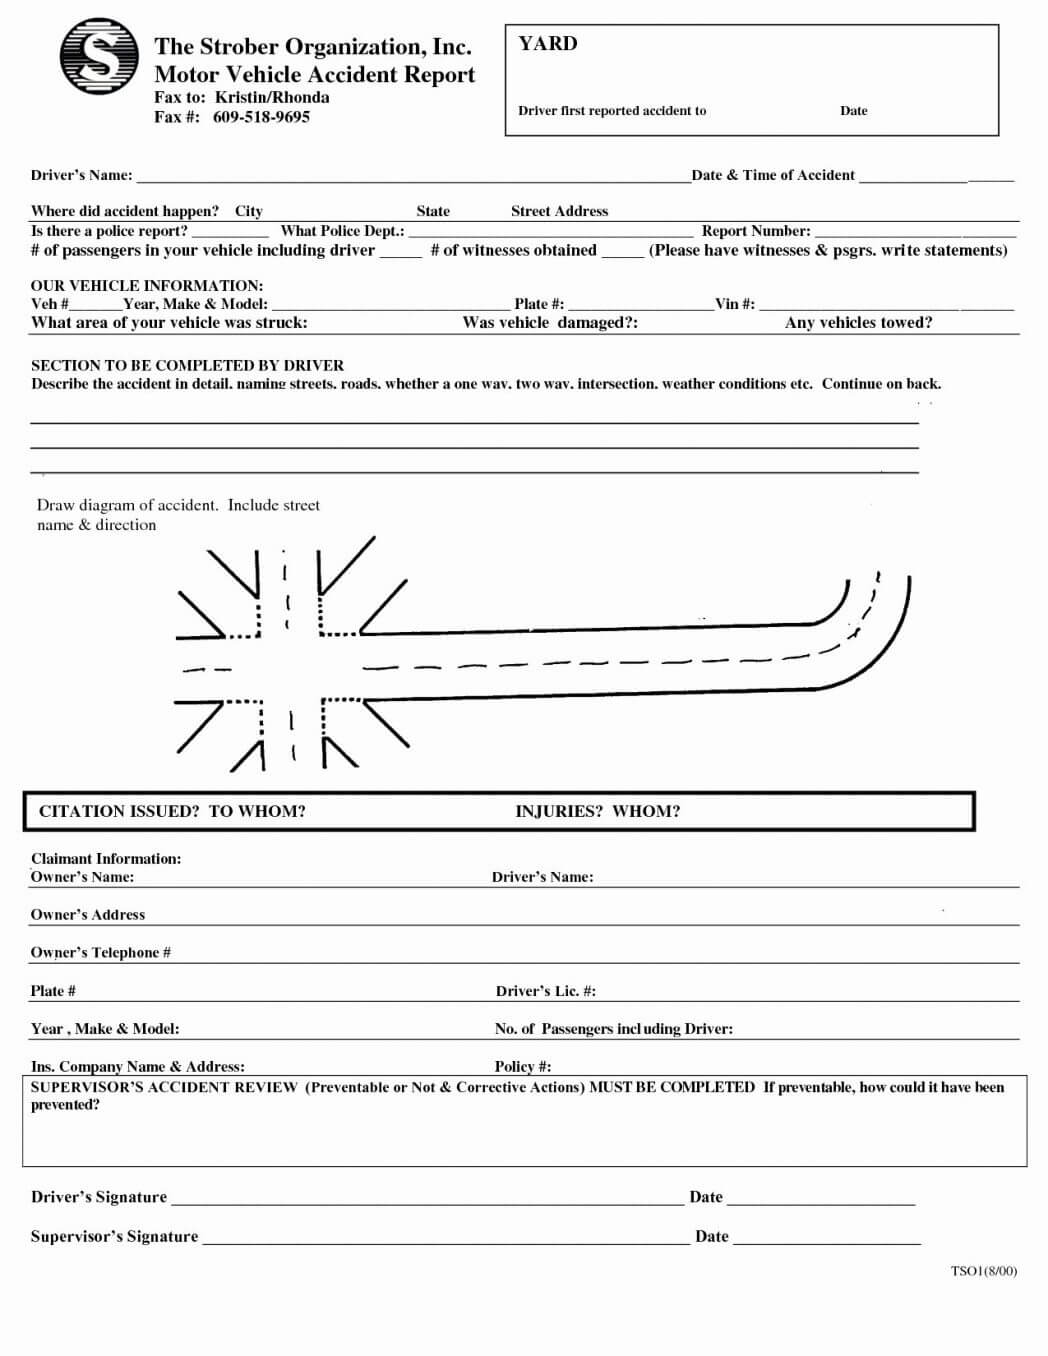 Accident Report Forms Template Awesome Incident Form Unique Regarding Motor Vehicle Accident Report Form Template